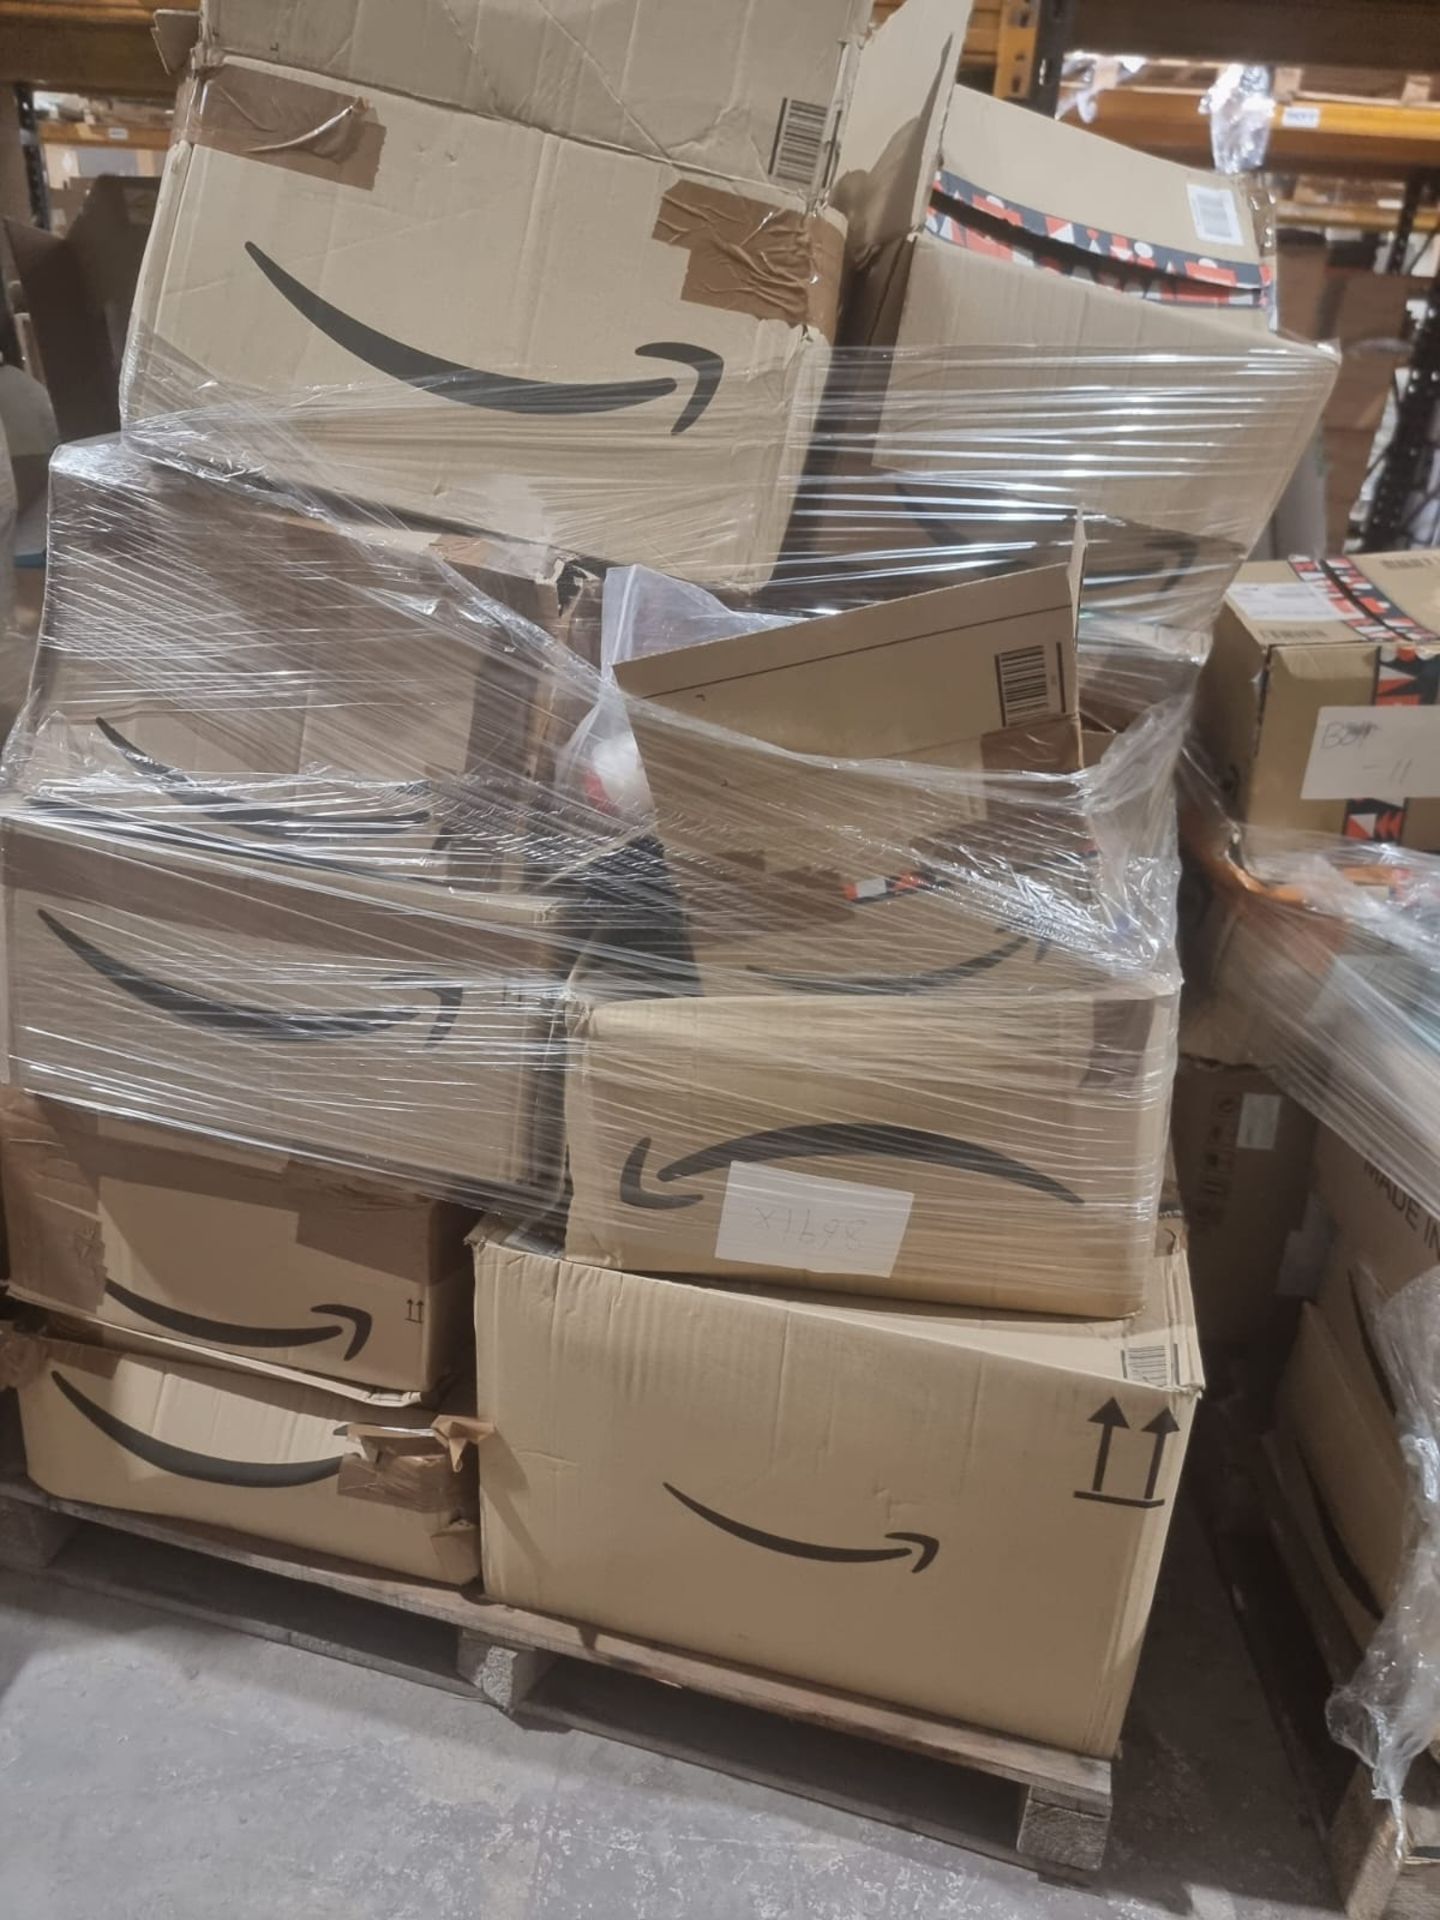 TRADE LOT TO CONTAIN 100 x MIXED BRAND NEW AMAZON OVERSTOCK ITEMS. ITEMS ARE PICKED RANDOMLY FROM - Image 17 of 20